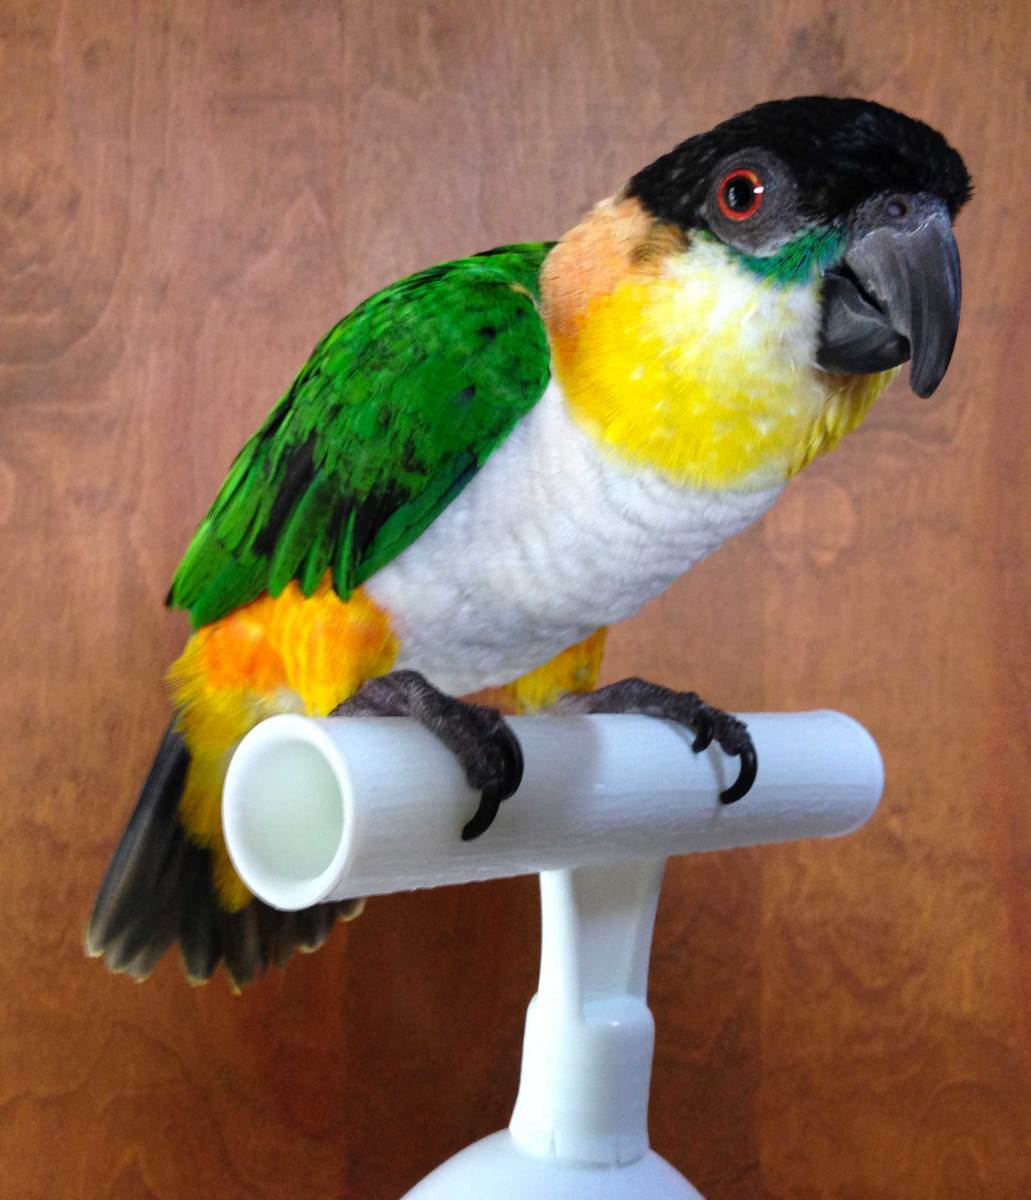 This is Jack.  He's a Black Headed Caique.  He's a beautiful bird and a great companion.